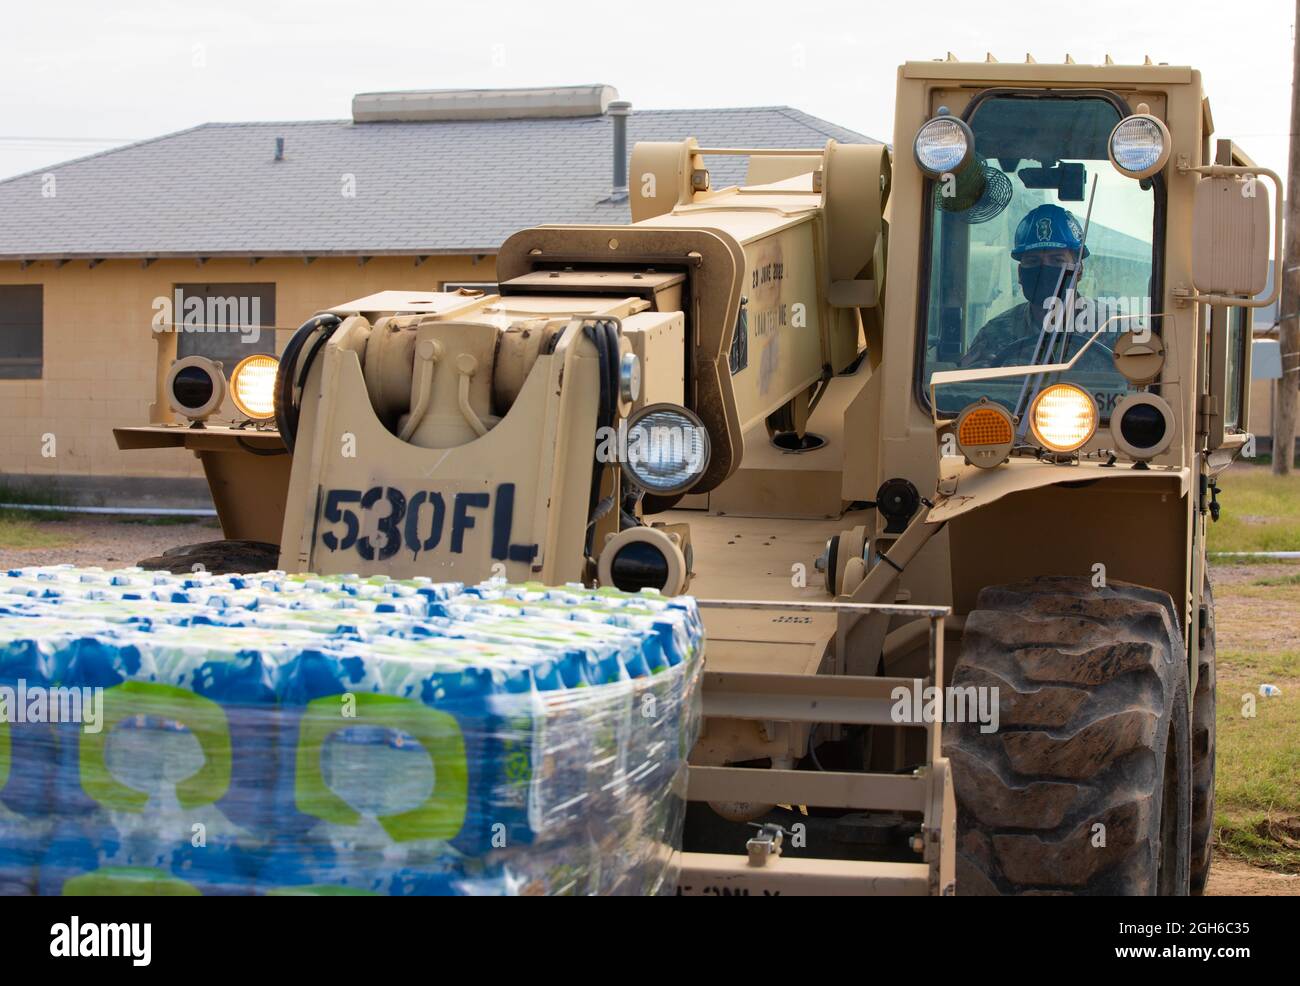 Spc. Ricardo Pabon, motor transport operator assigned to 1st Battalion, 6th Infantry Regiment, 2nd Brigade Combat Team, 1st Armored Division, delivers a pallet of water to one of the drop points at Fort Bliss’ Doña Ana Complex in New Mexico, Sept. 4, 2021. The Department of Defense, through U.S. Northern Command, and in support of the Department of Homeland Security, is providing transportation, temporary housing, medical screening, and general support for at least 50,000 Afghan evacuees at suitable facilities, in permanent or temporary structures, as quickly as possible. This initiative provi Stock Photo